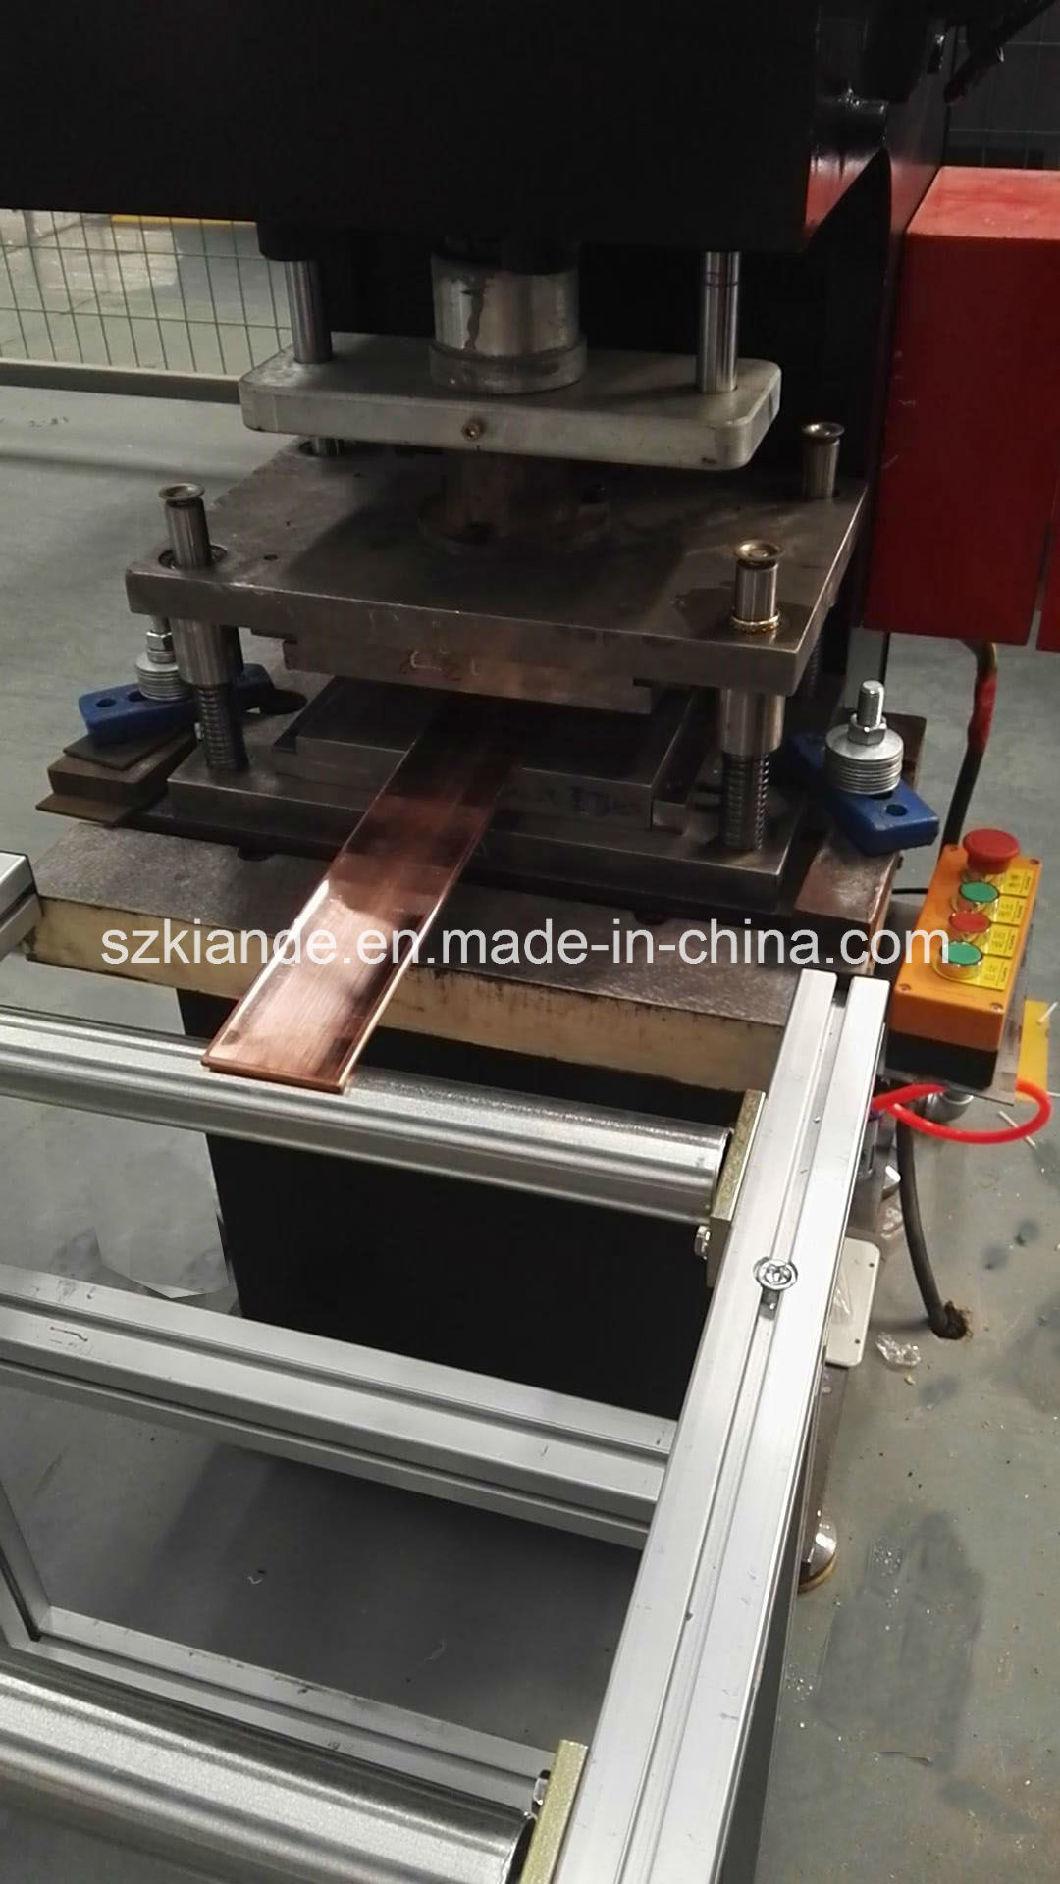 Bbt Busbar Bending Punching Machine Copper Bar Processing Machinery for Compact Busway System